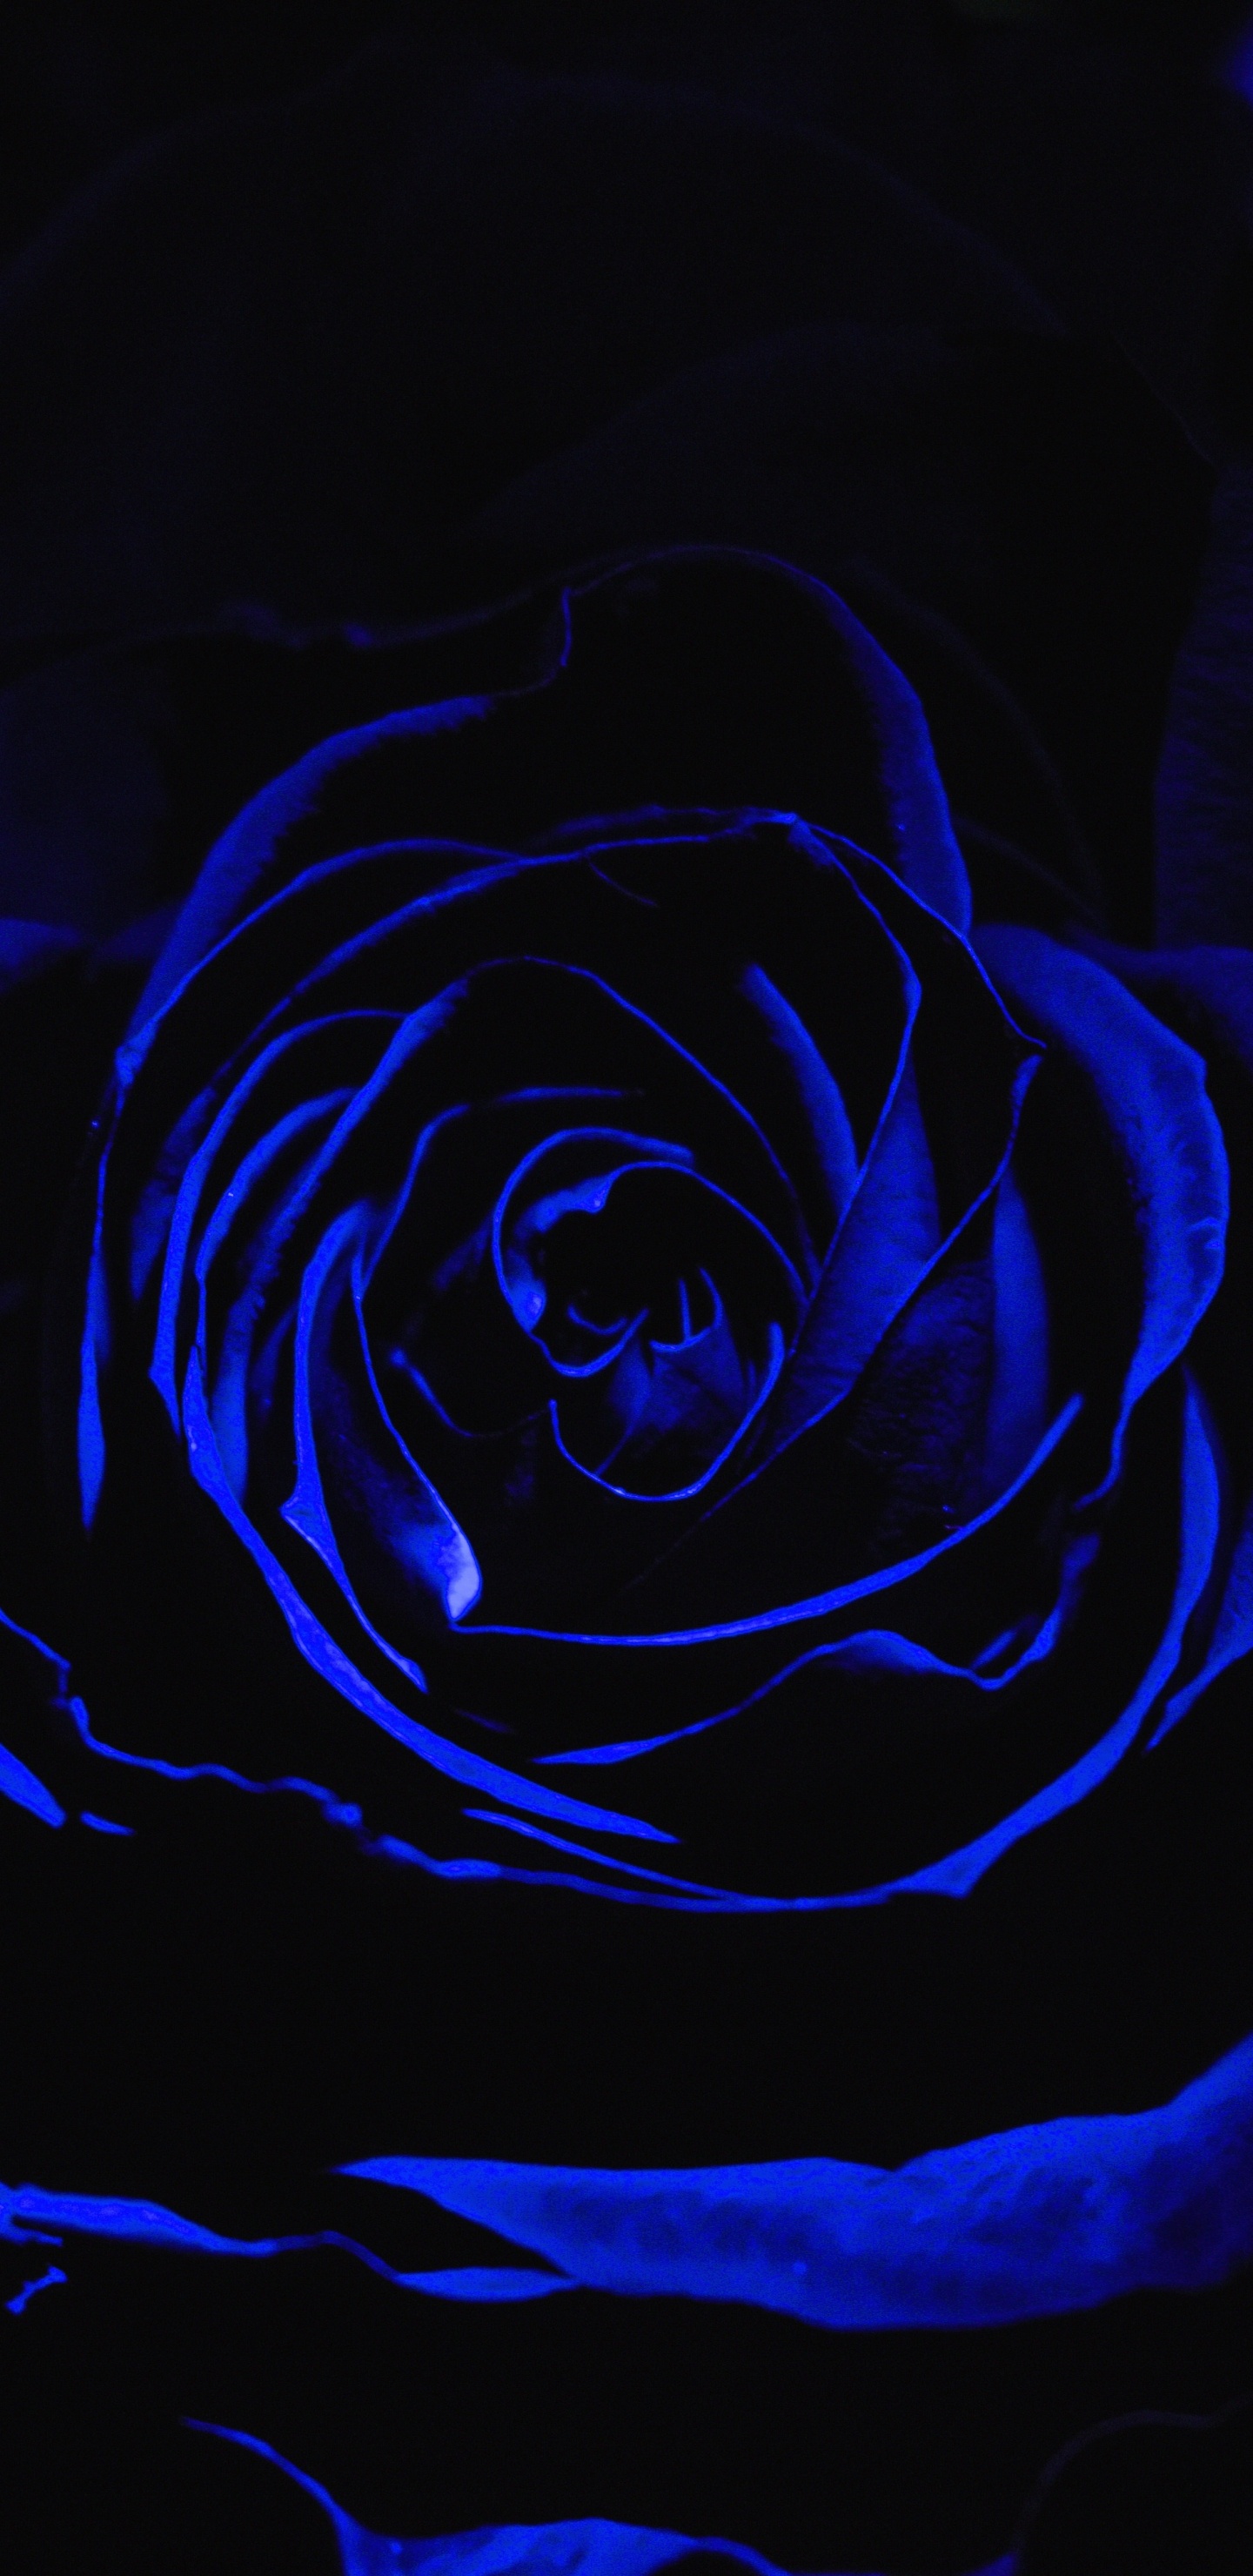 Blue Rose in Close up Photography. Wallpaper in 1440x2960 Resolution